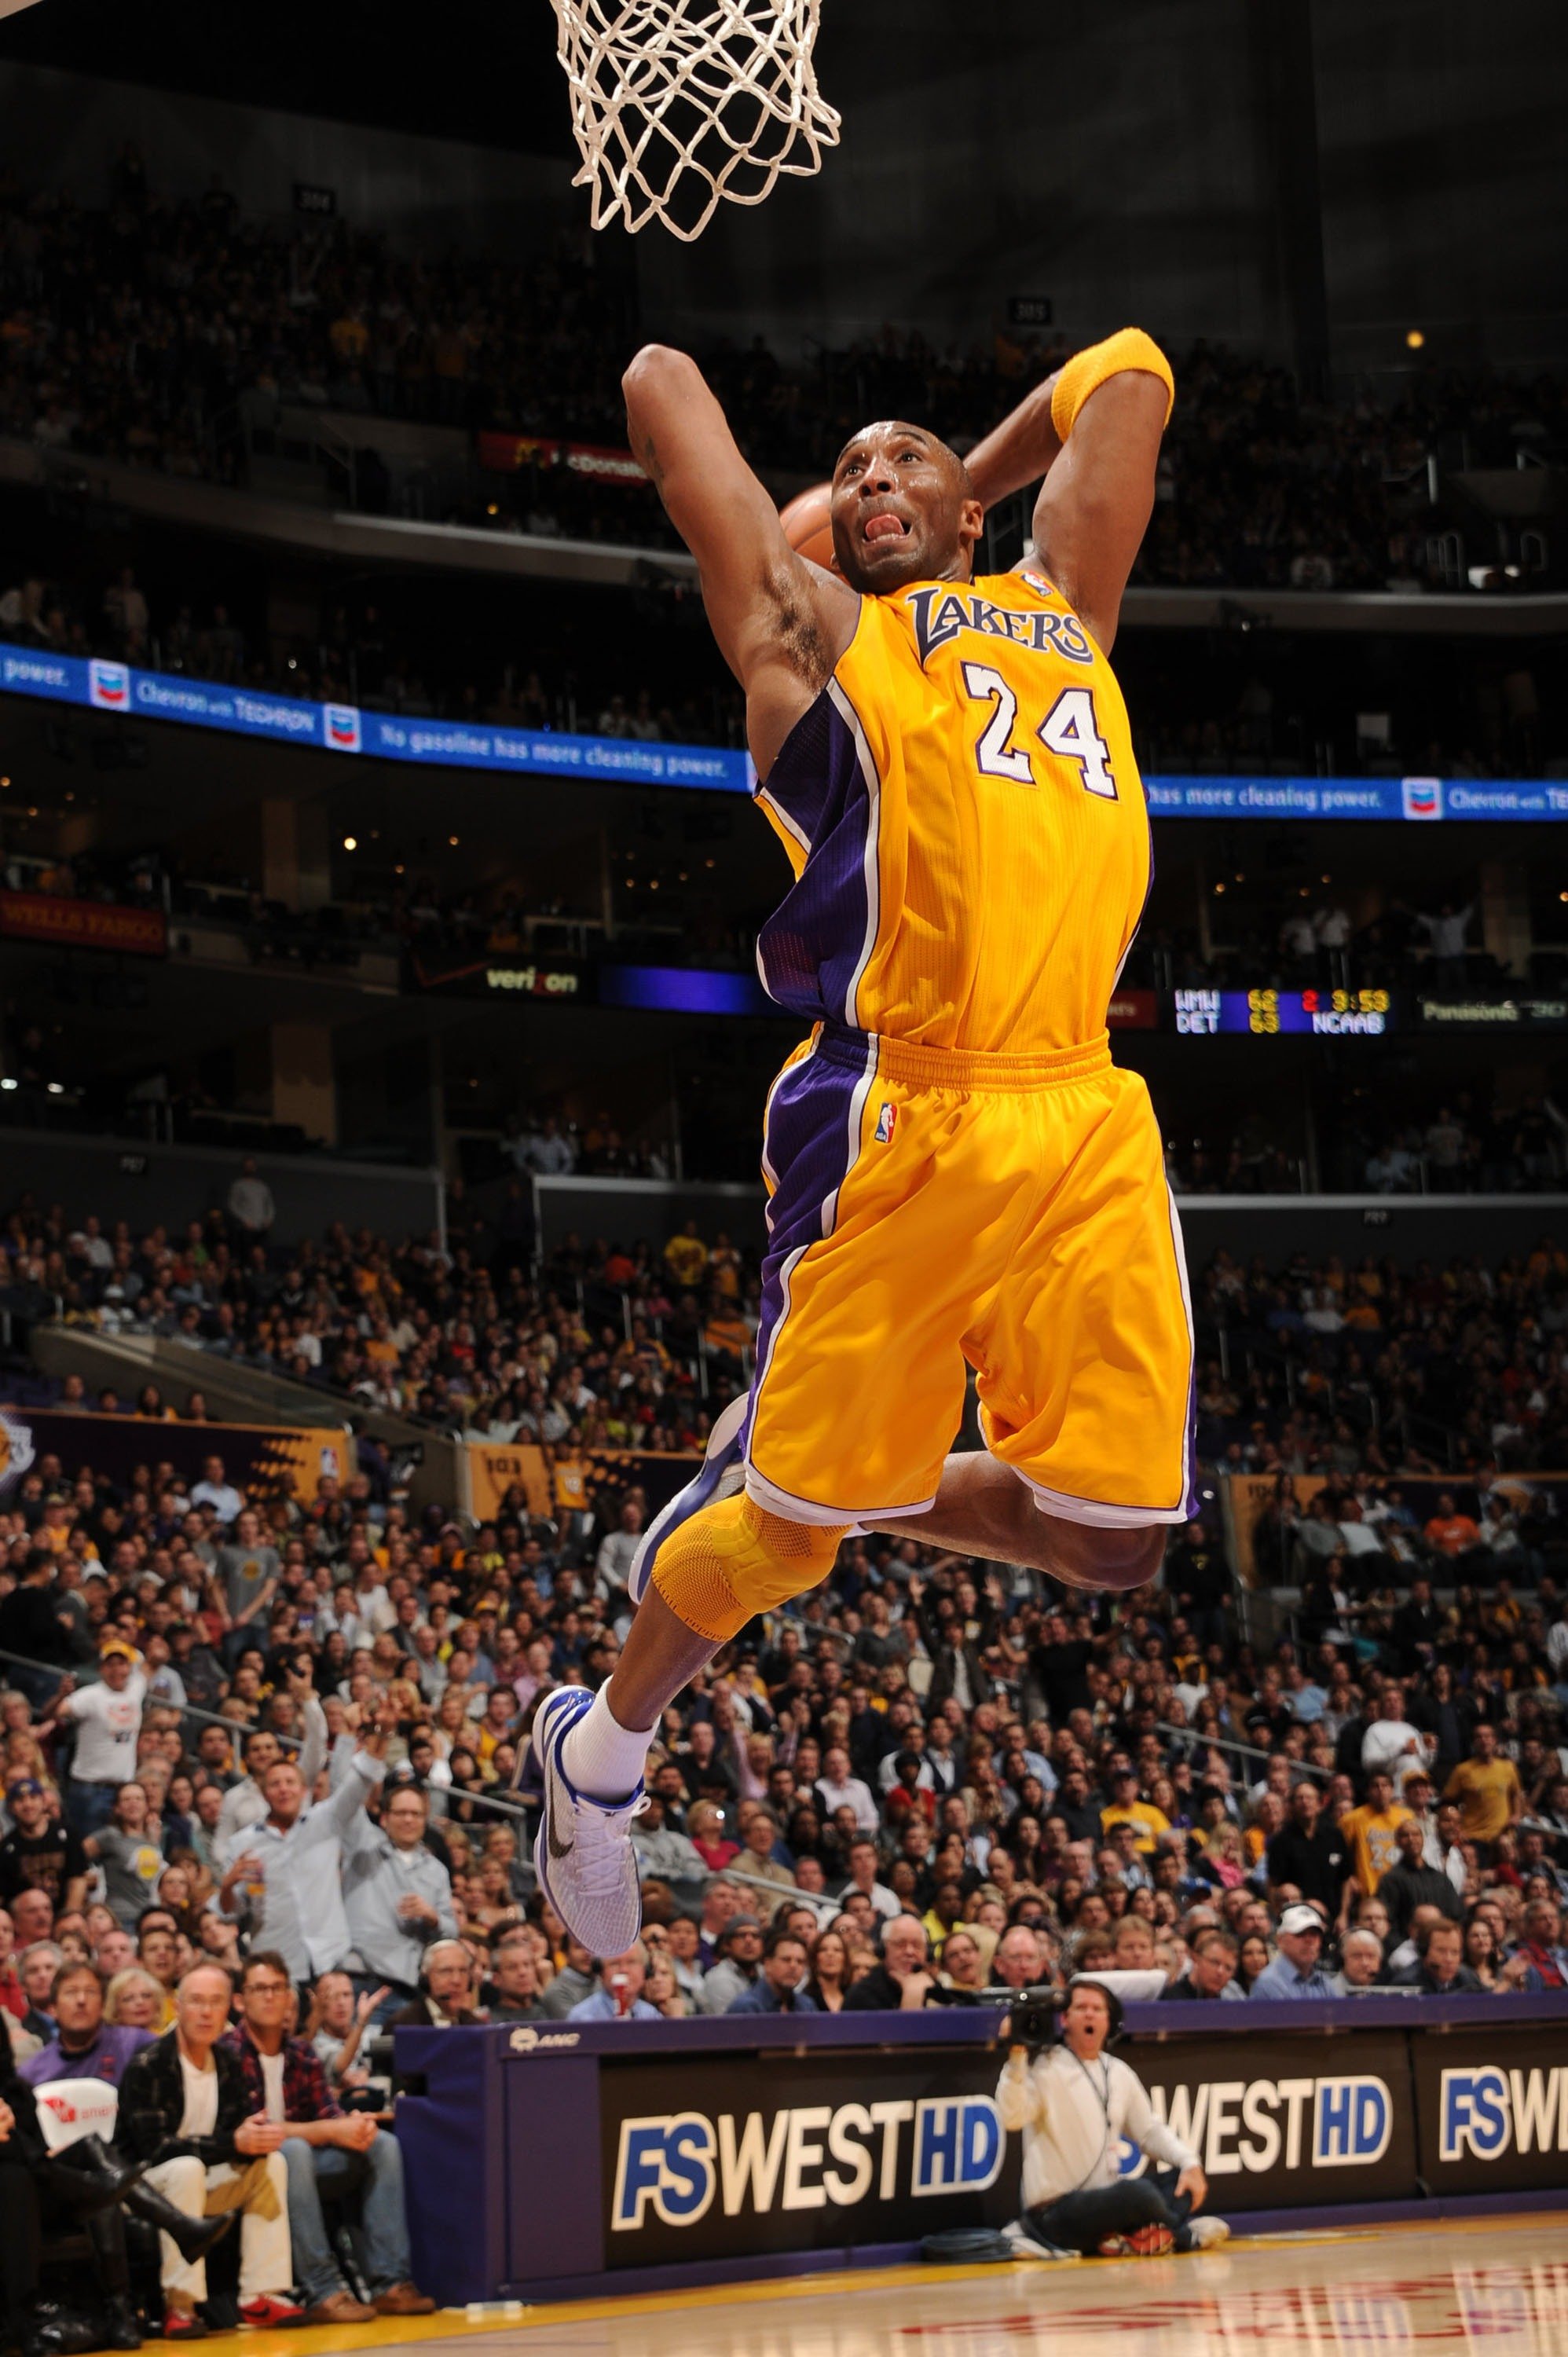 Kobe Bryant of the Los Angeles Lakers goes up for a dunk against the Sacramento Kings at Staples Center on January 28, 2011 in Los Angeles, California. | Source: Getty Images